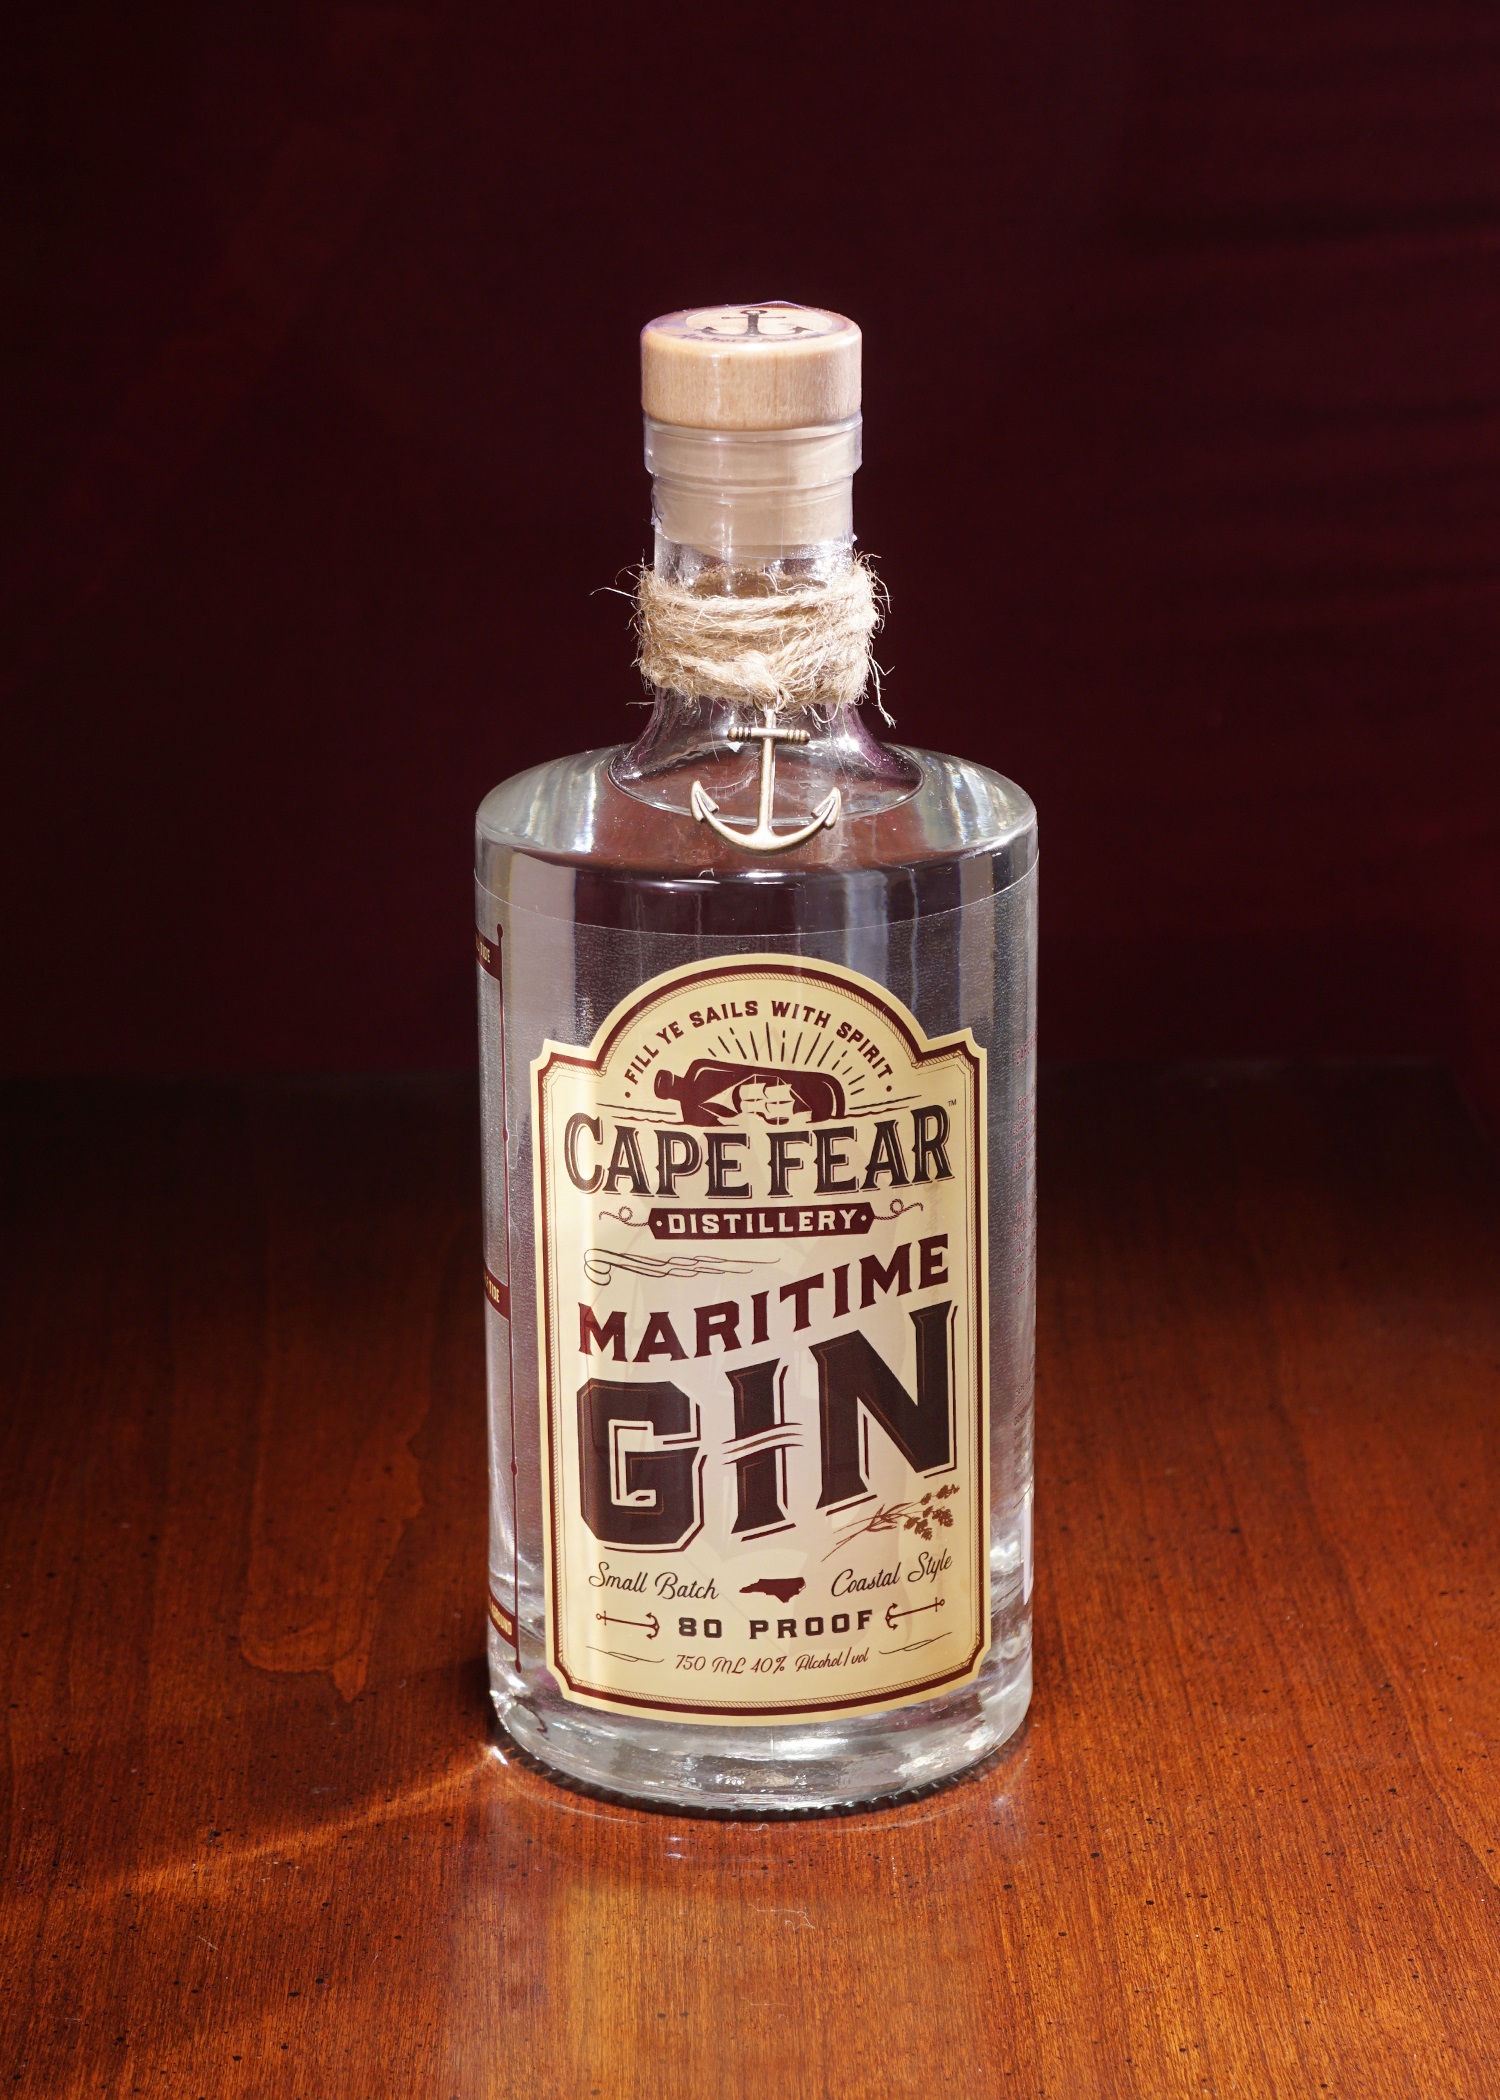 Cape Fear Distiller’s “Maritime Gin” is available for purchase at the distillery and will be available in ABC stores soon. Tours at Cape Fear Distillery are $5 and include a free gin tasting.